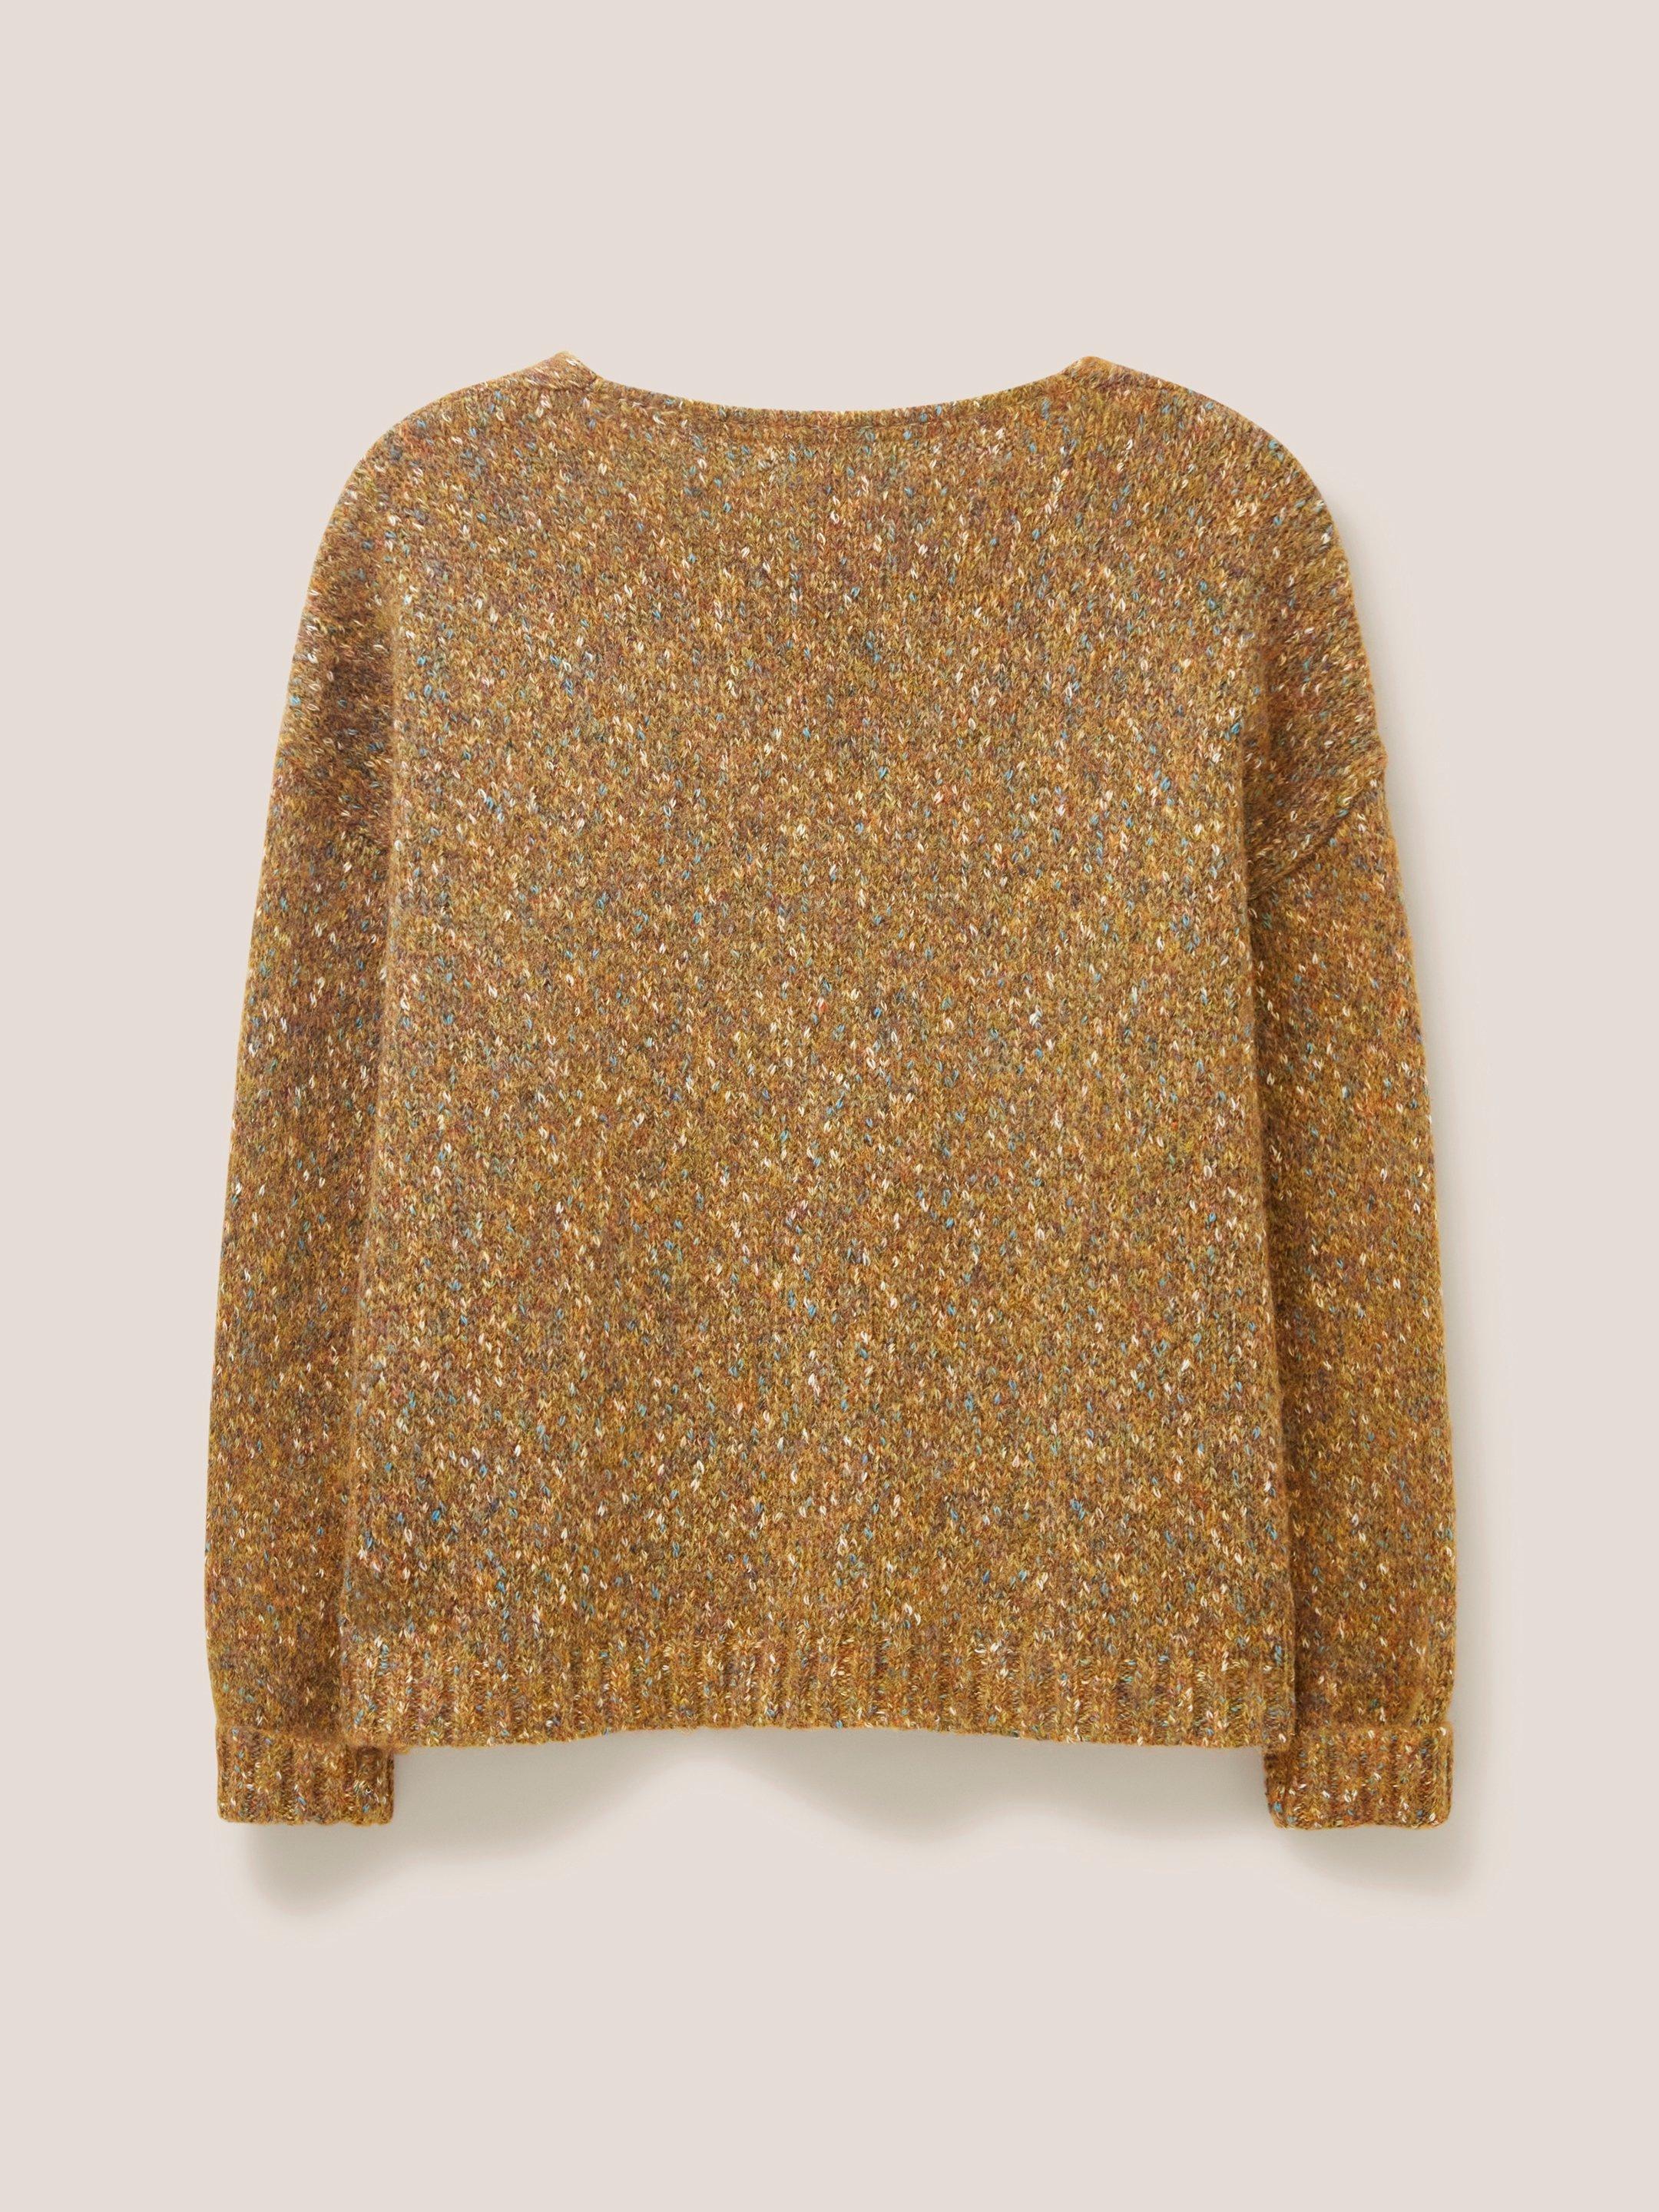 TEXTURE JUMPER in BROWN MLT - FLAT BACK